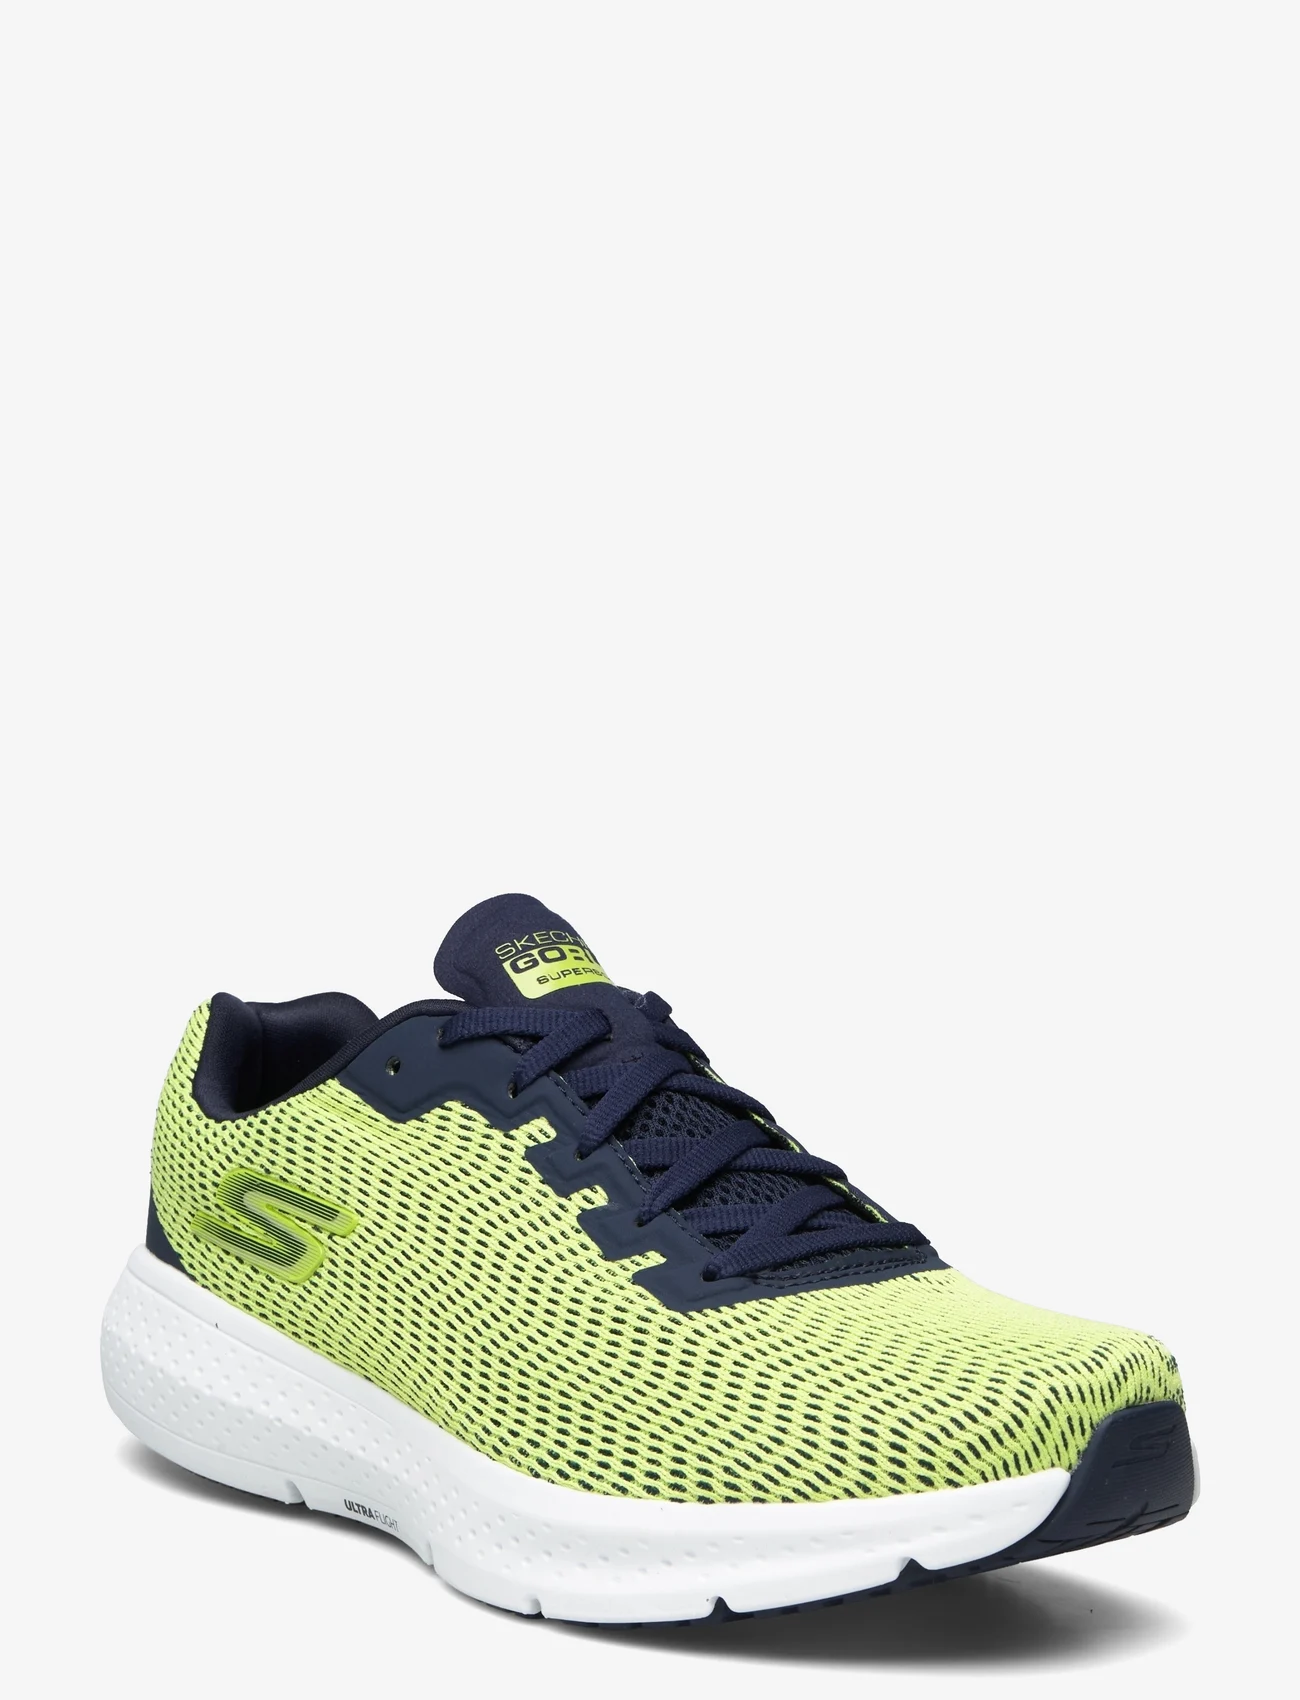 Skechers - Mens Go Run Supersonic  - Relaxed Fit - löparskor - ylnv yellow navy - 0